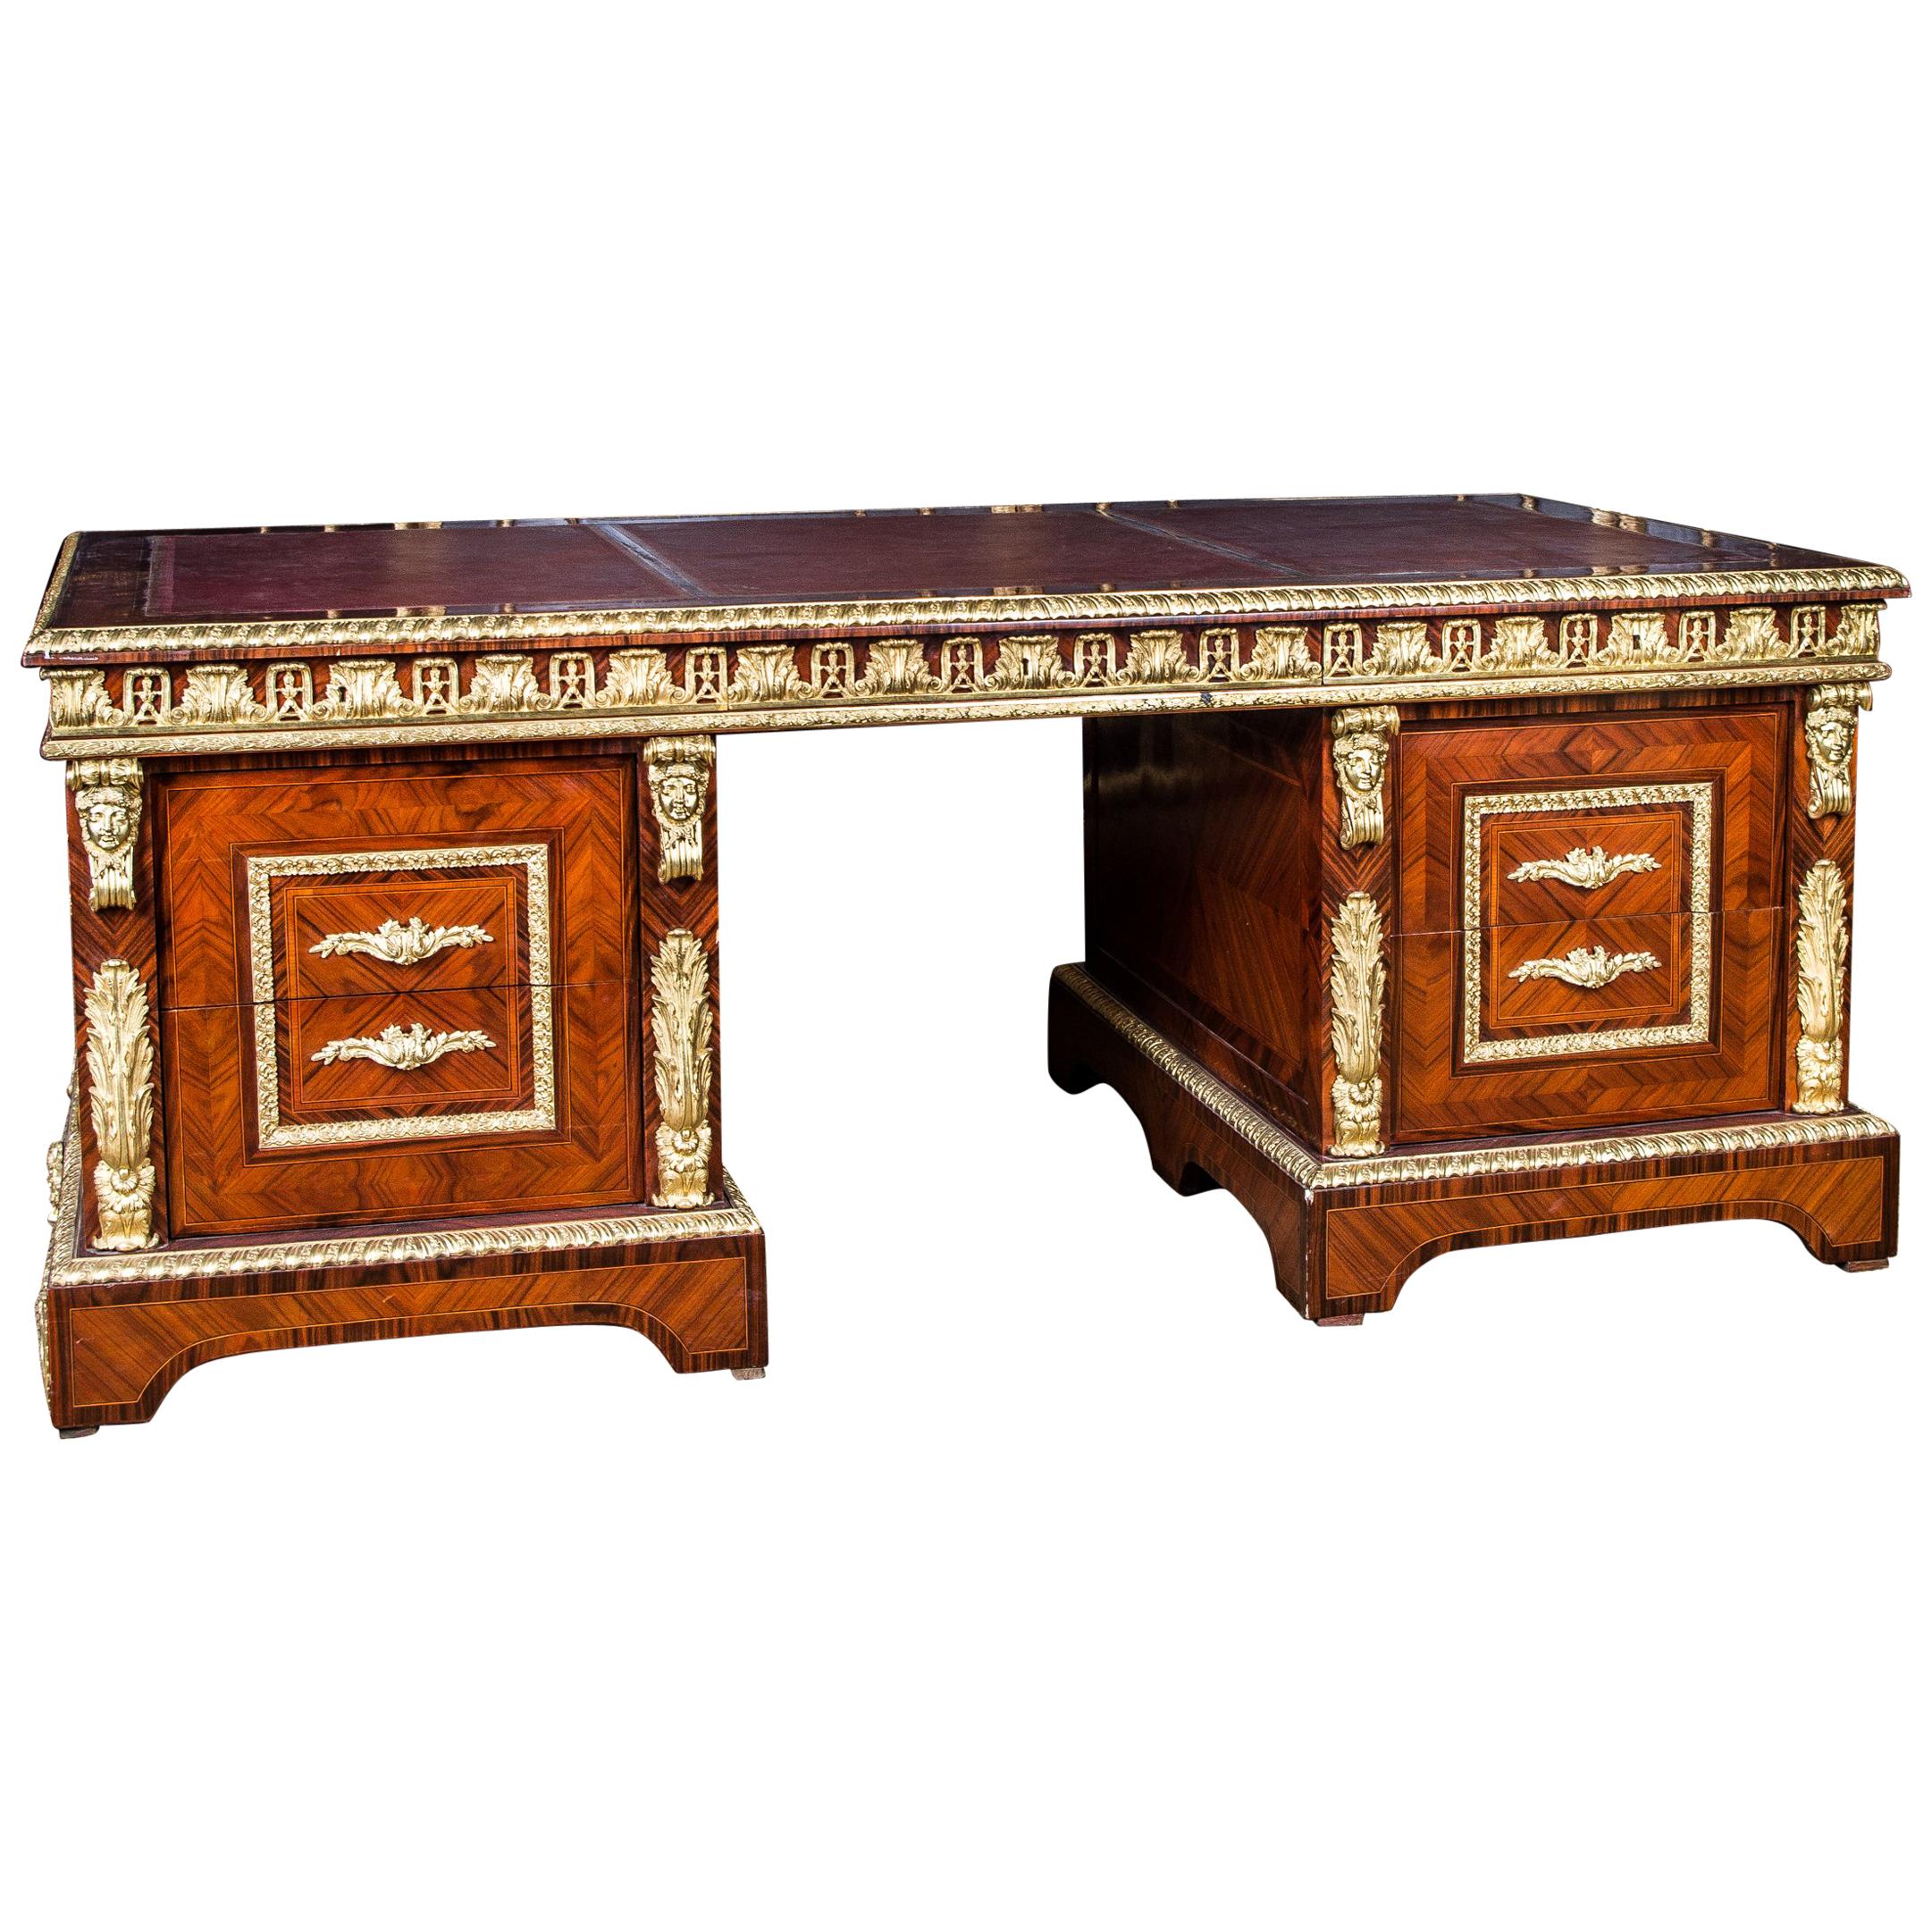 Impressive French Writing Desk in the Style of Louis XIV